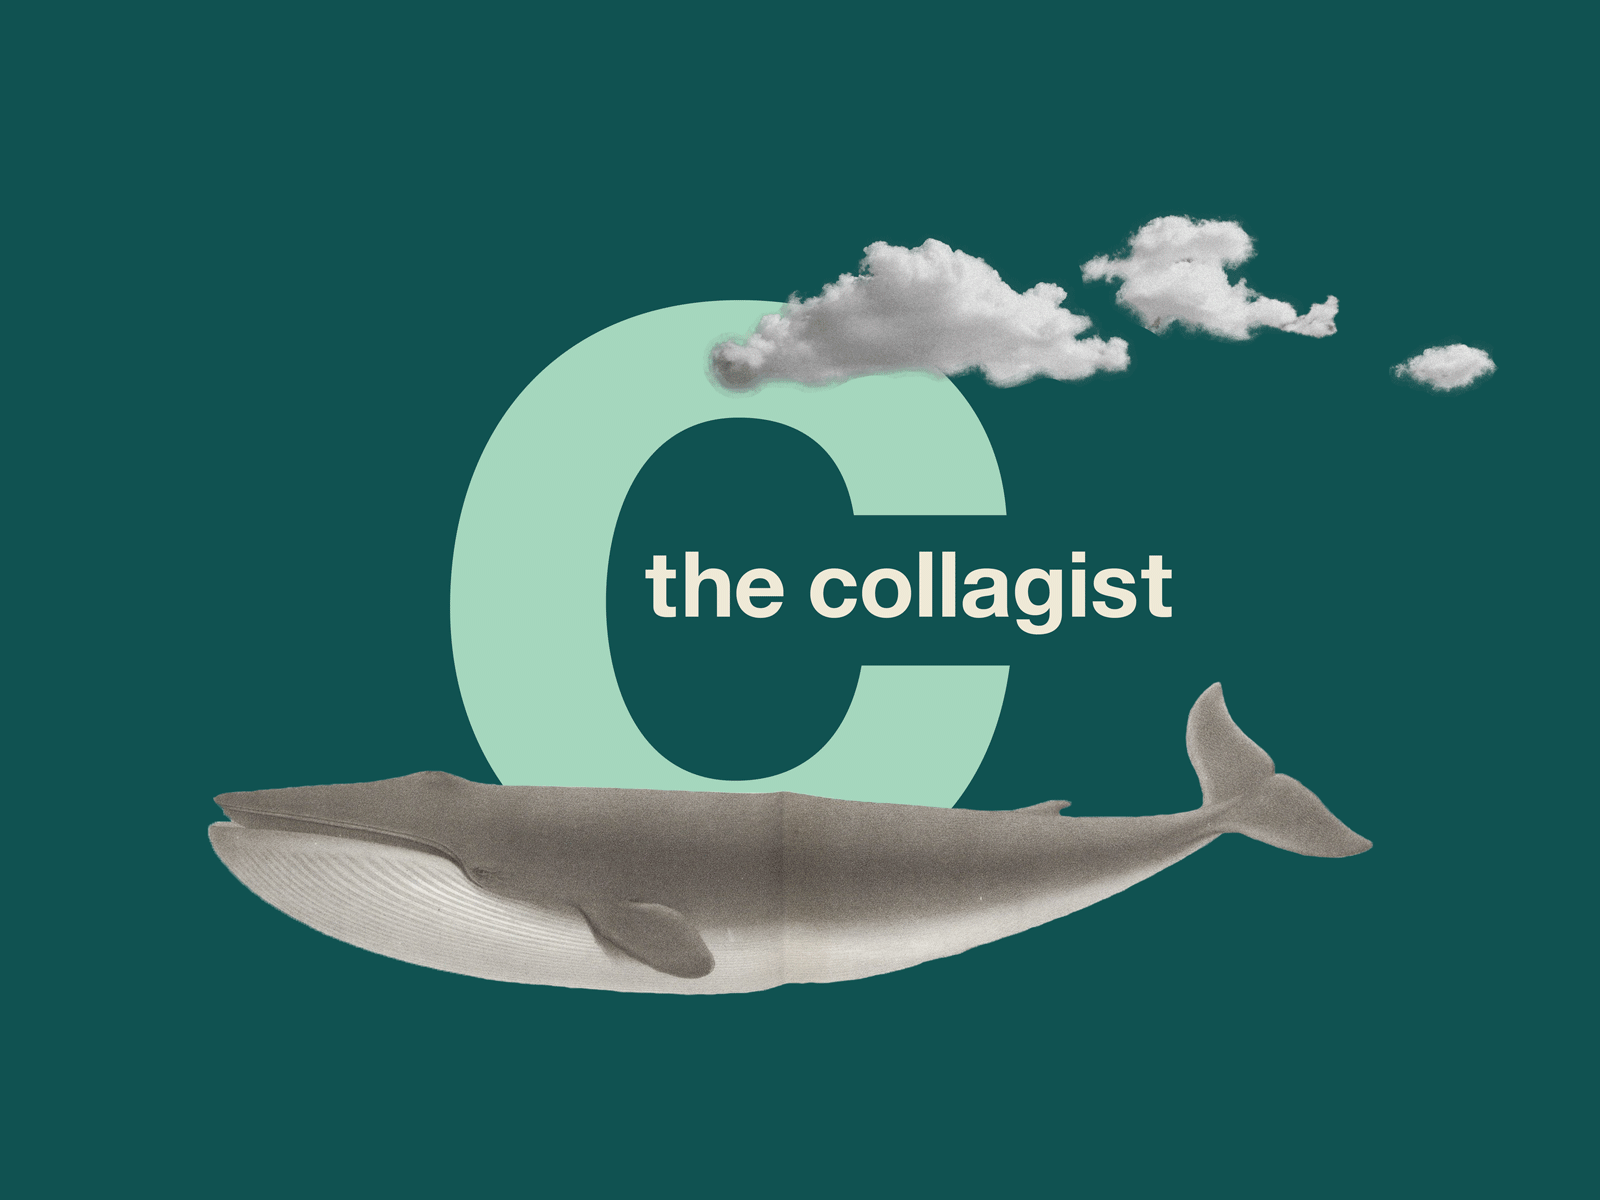 The Collagist Board Game board game clouds collage collage art collage design design flat game game art game design gameideas gif graphic design inspiration logo logotype whale